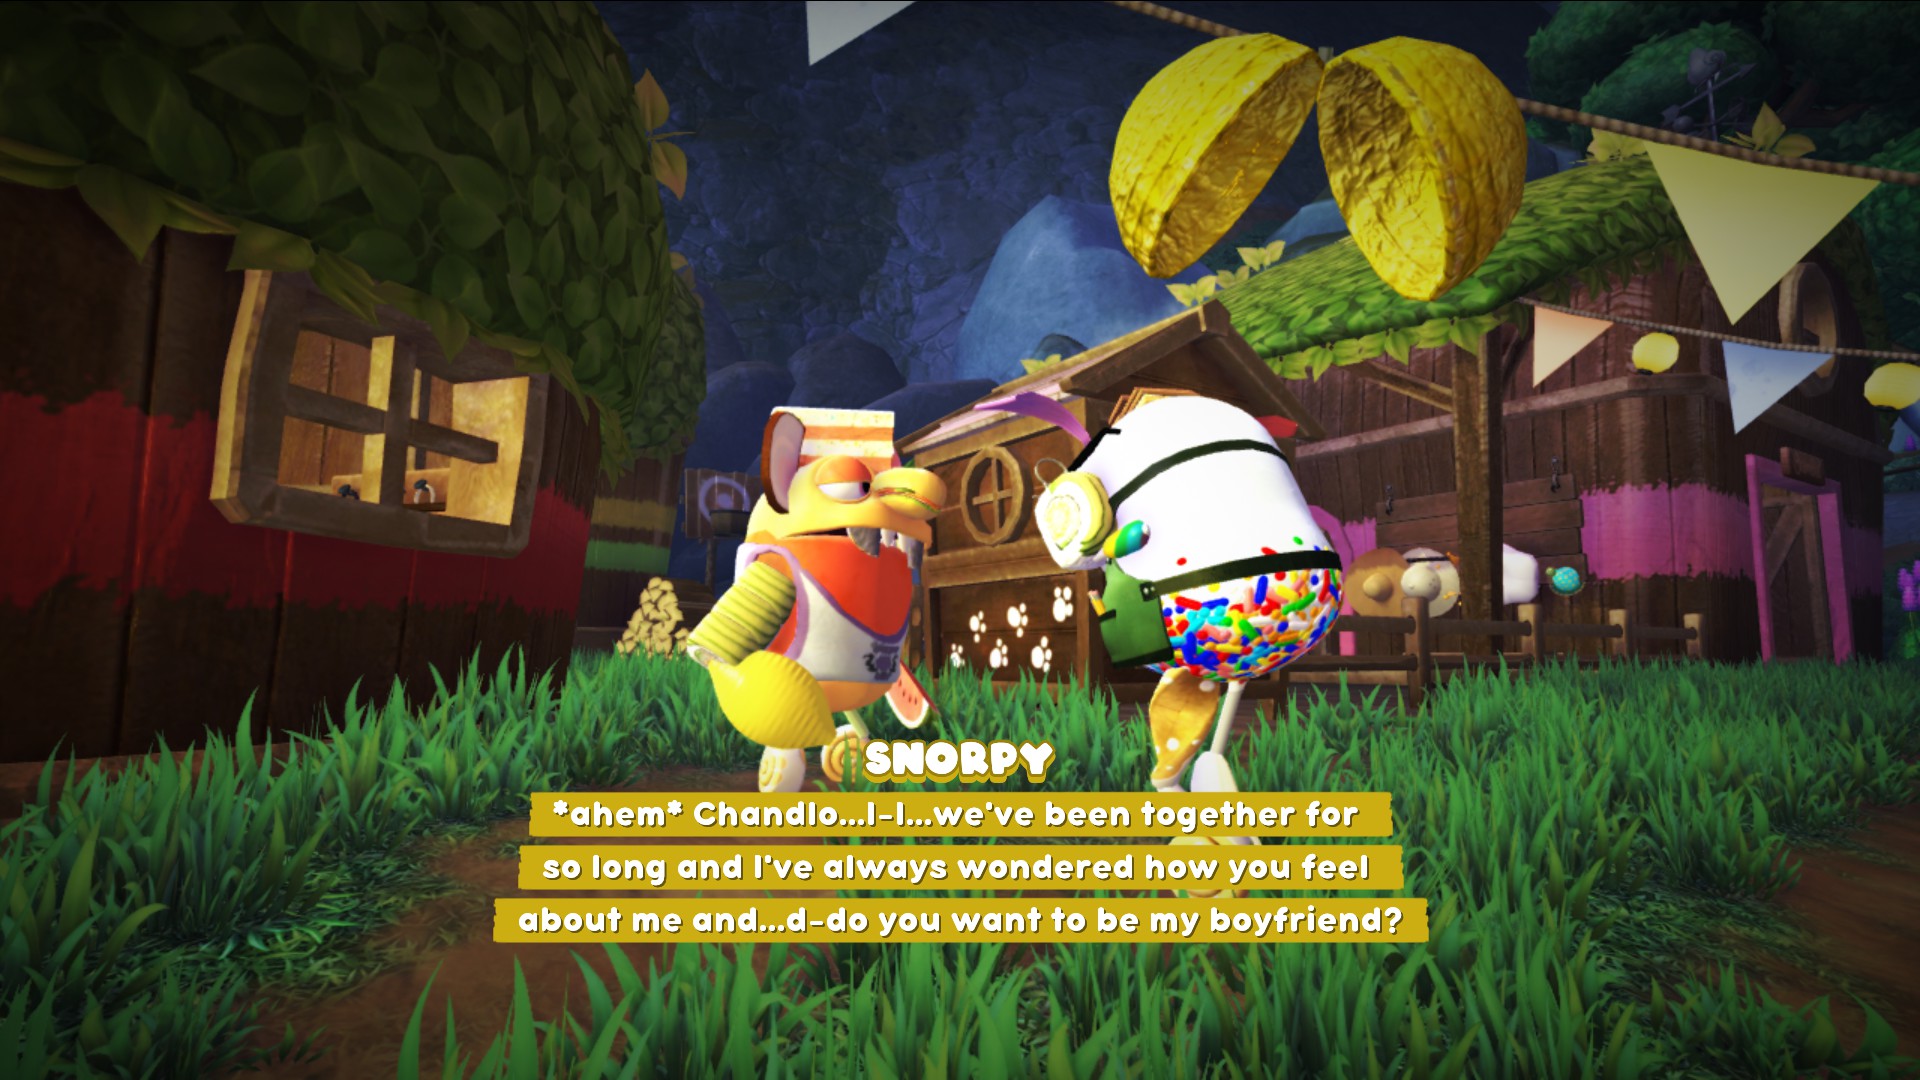 Screenshot of bugsnax of Snorpy and Chandlo. Snorpy's dialogue on screen says: ahem, Chandlo...I-I...we've been together for so long and I've always wondered how you feel about me and...d-do you want to be my boyfriend?